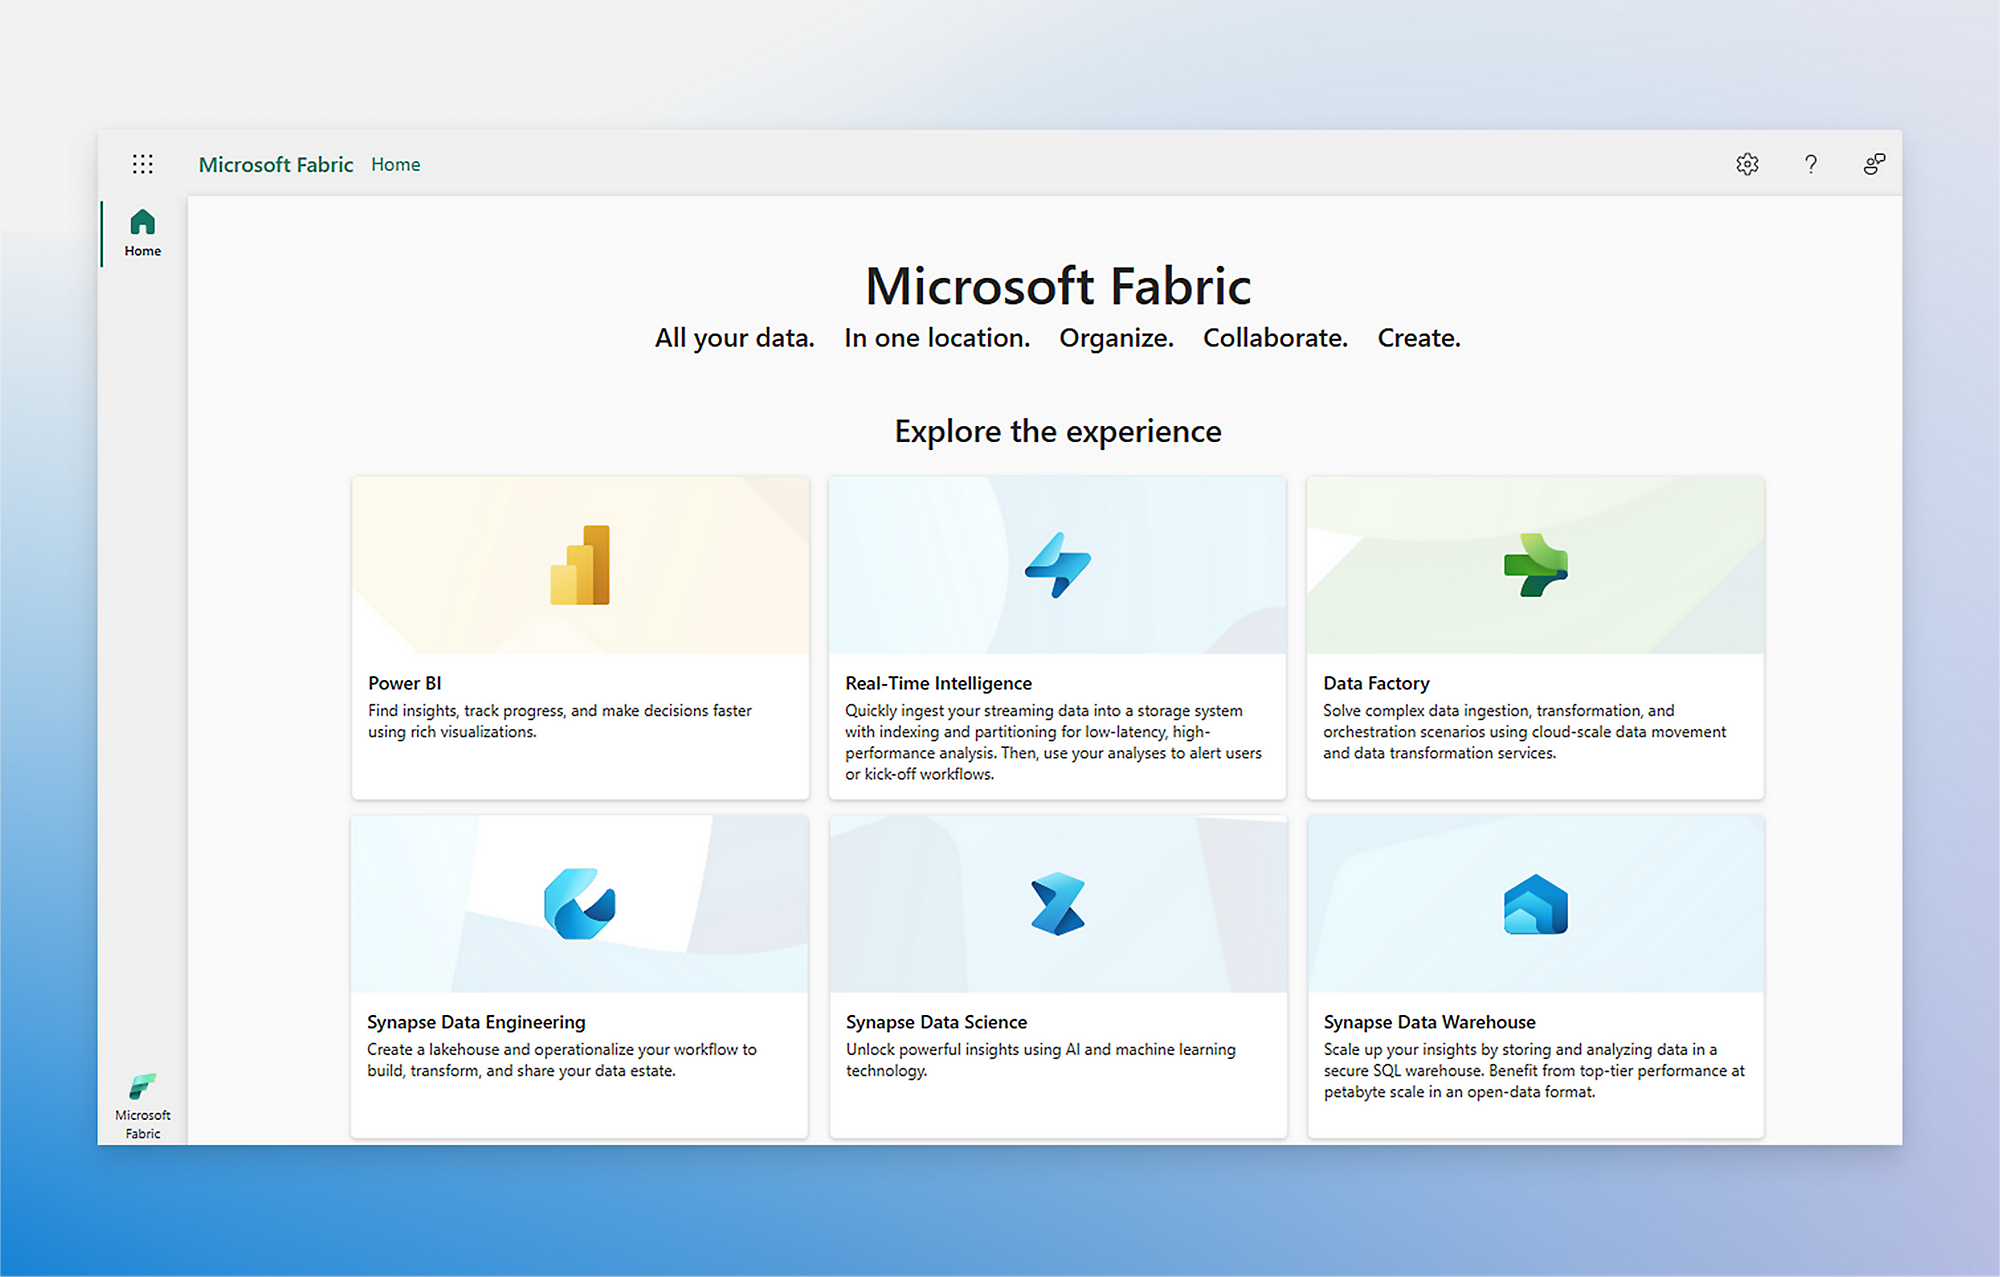 Landing page for Microsoft Fabric